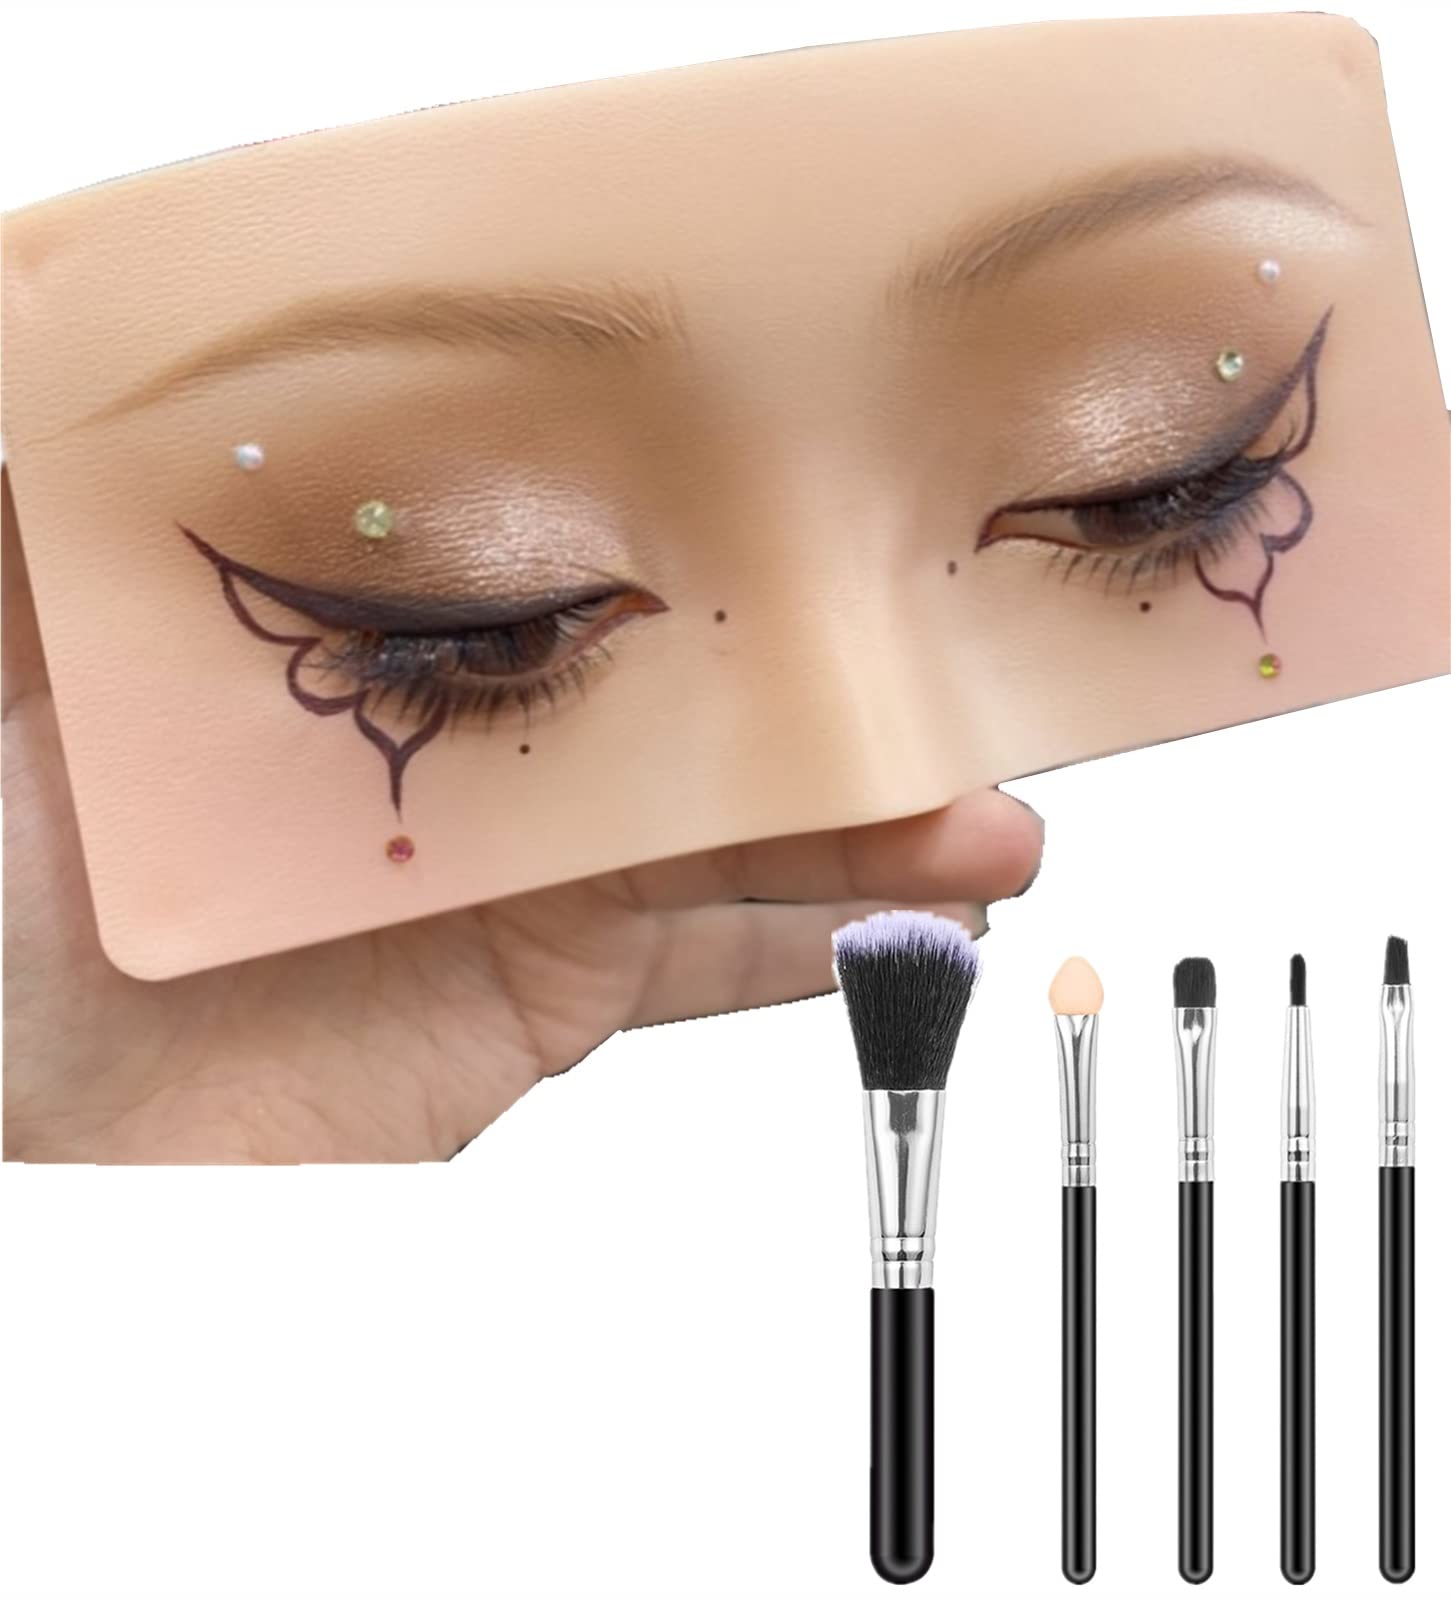 5d Makeup Practice Board Makeup Face Practice Board with Self-Adhesive  Eyelashes&Eyeshadow Applicators Silicone Eyes for Makeup Practice Suitable  for Eyeshadow&Tattoo Skin Practice